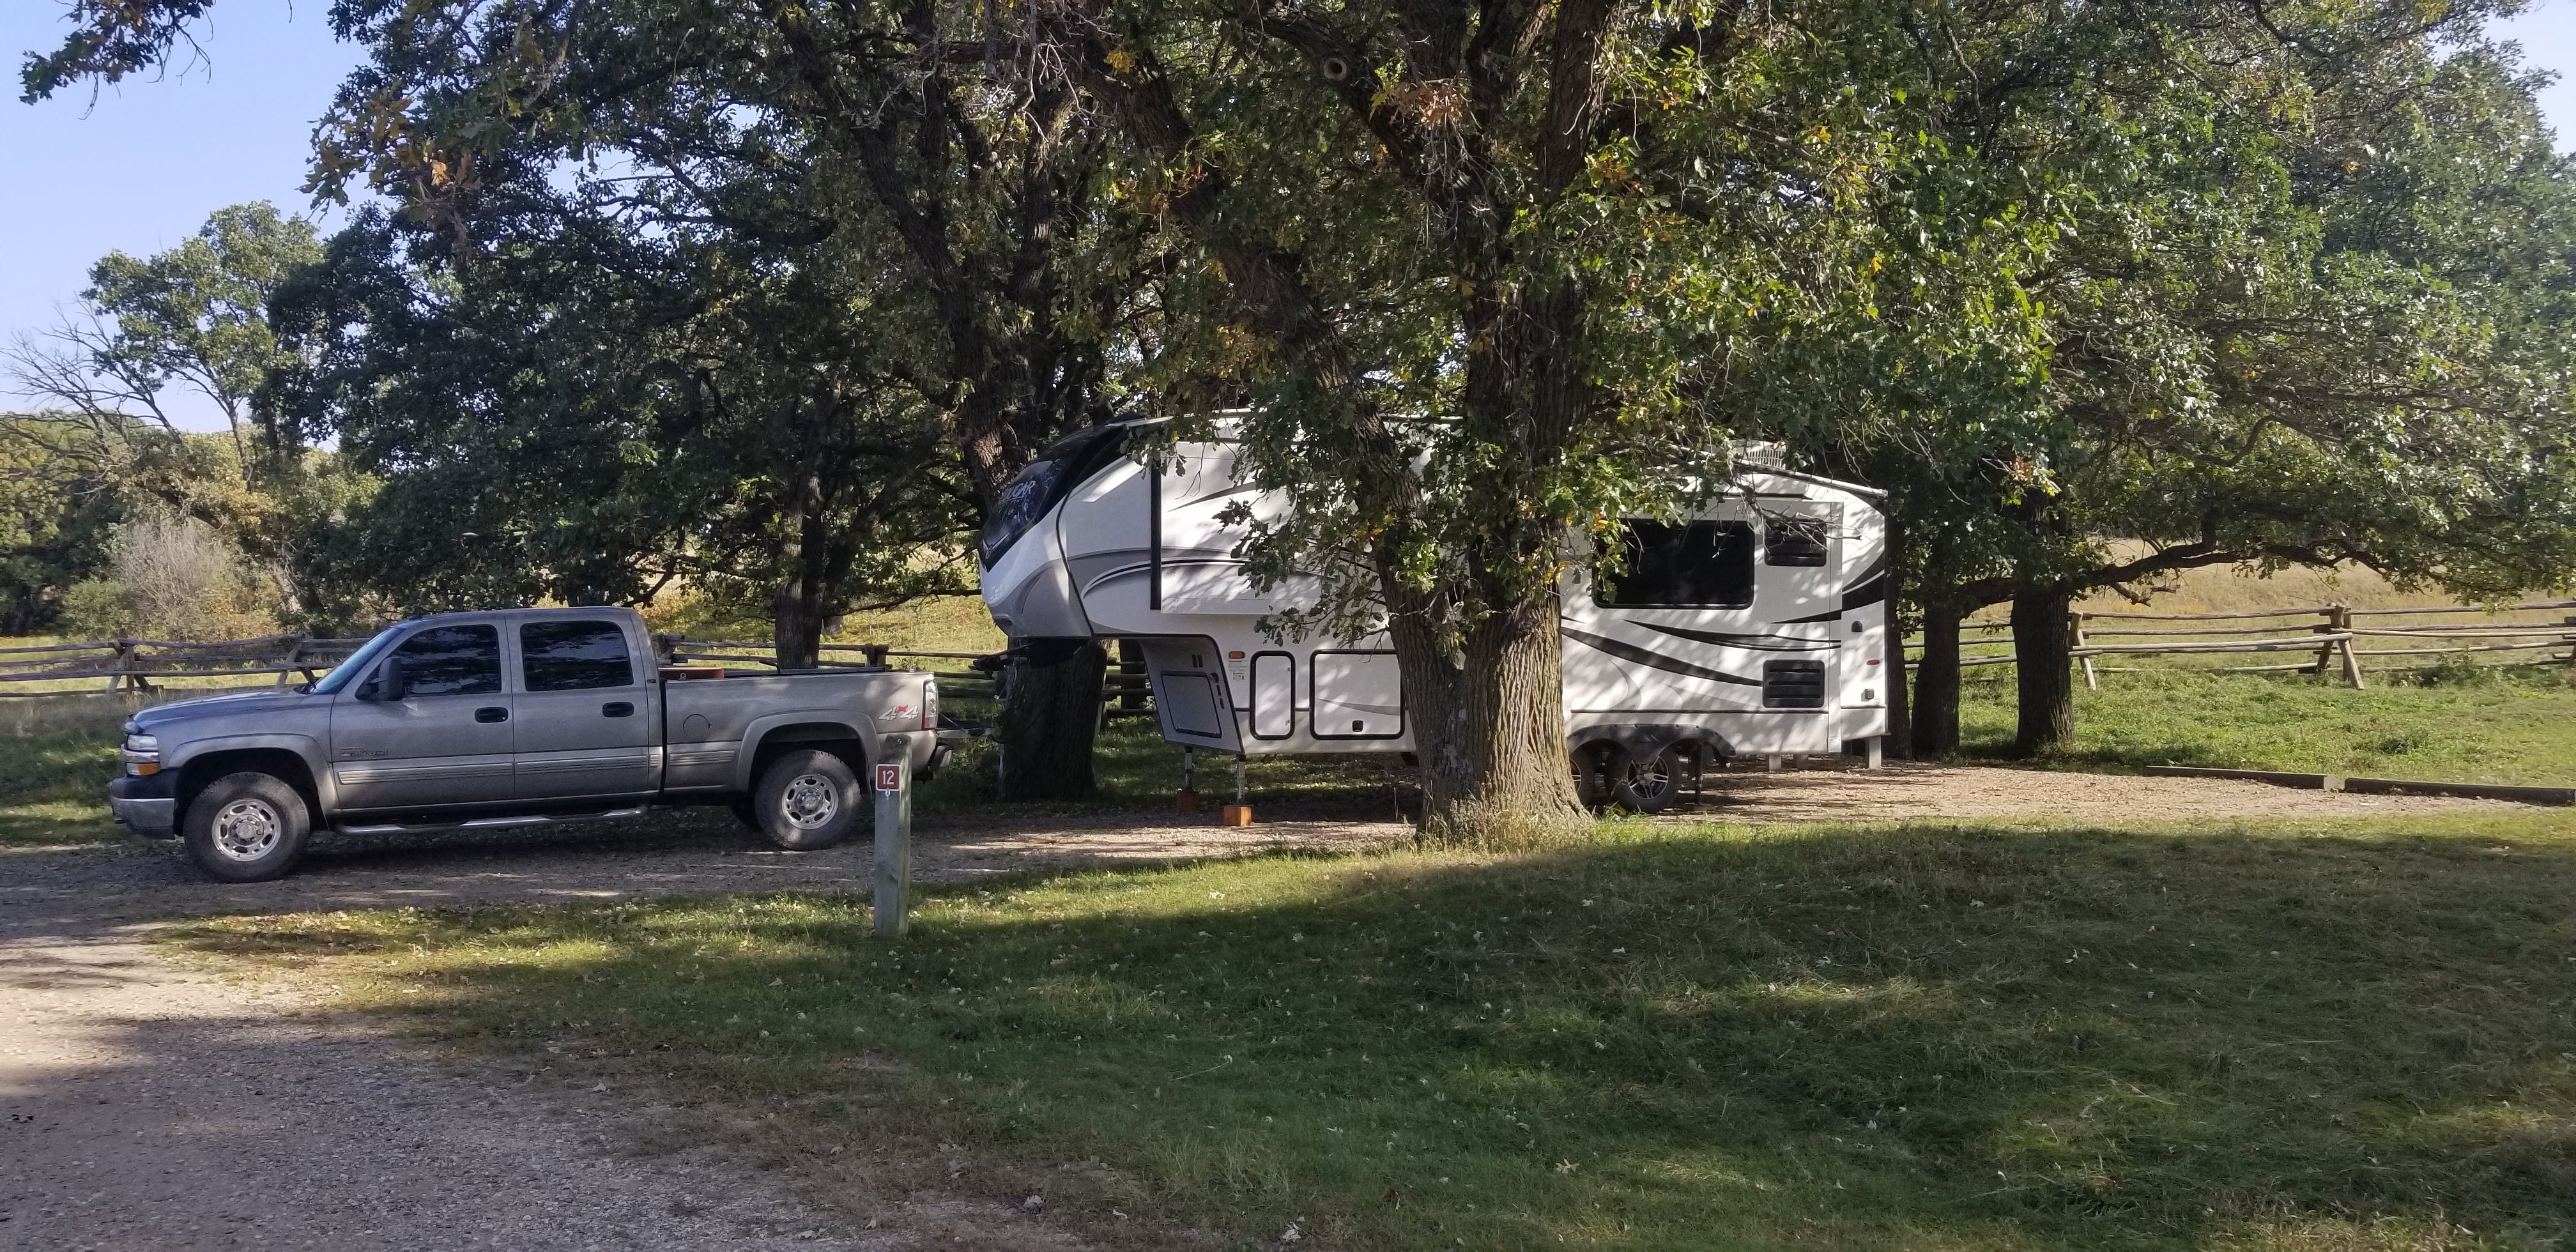 Camper submitted image from Hankinson Hills Campground - 1